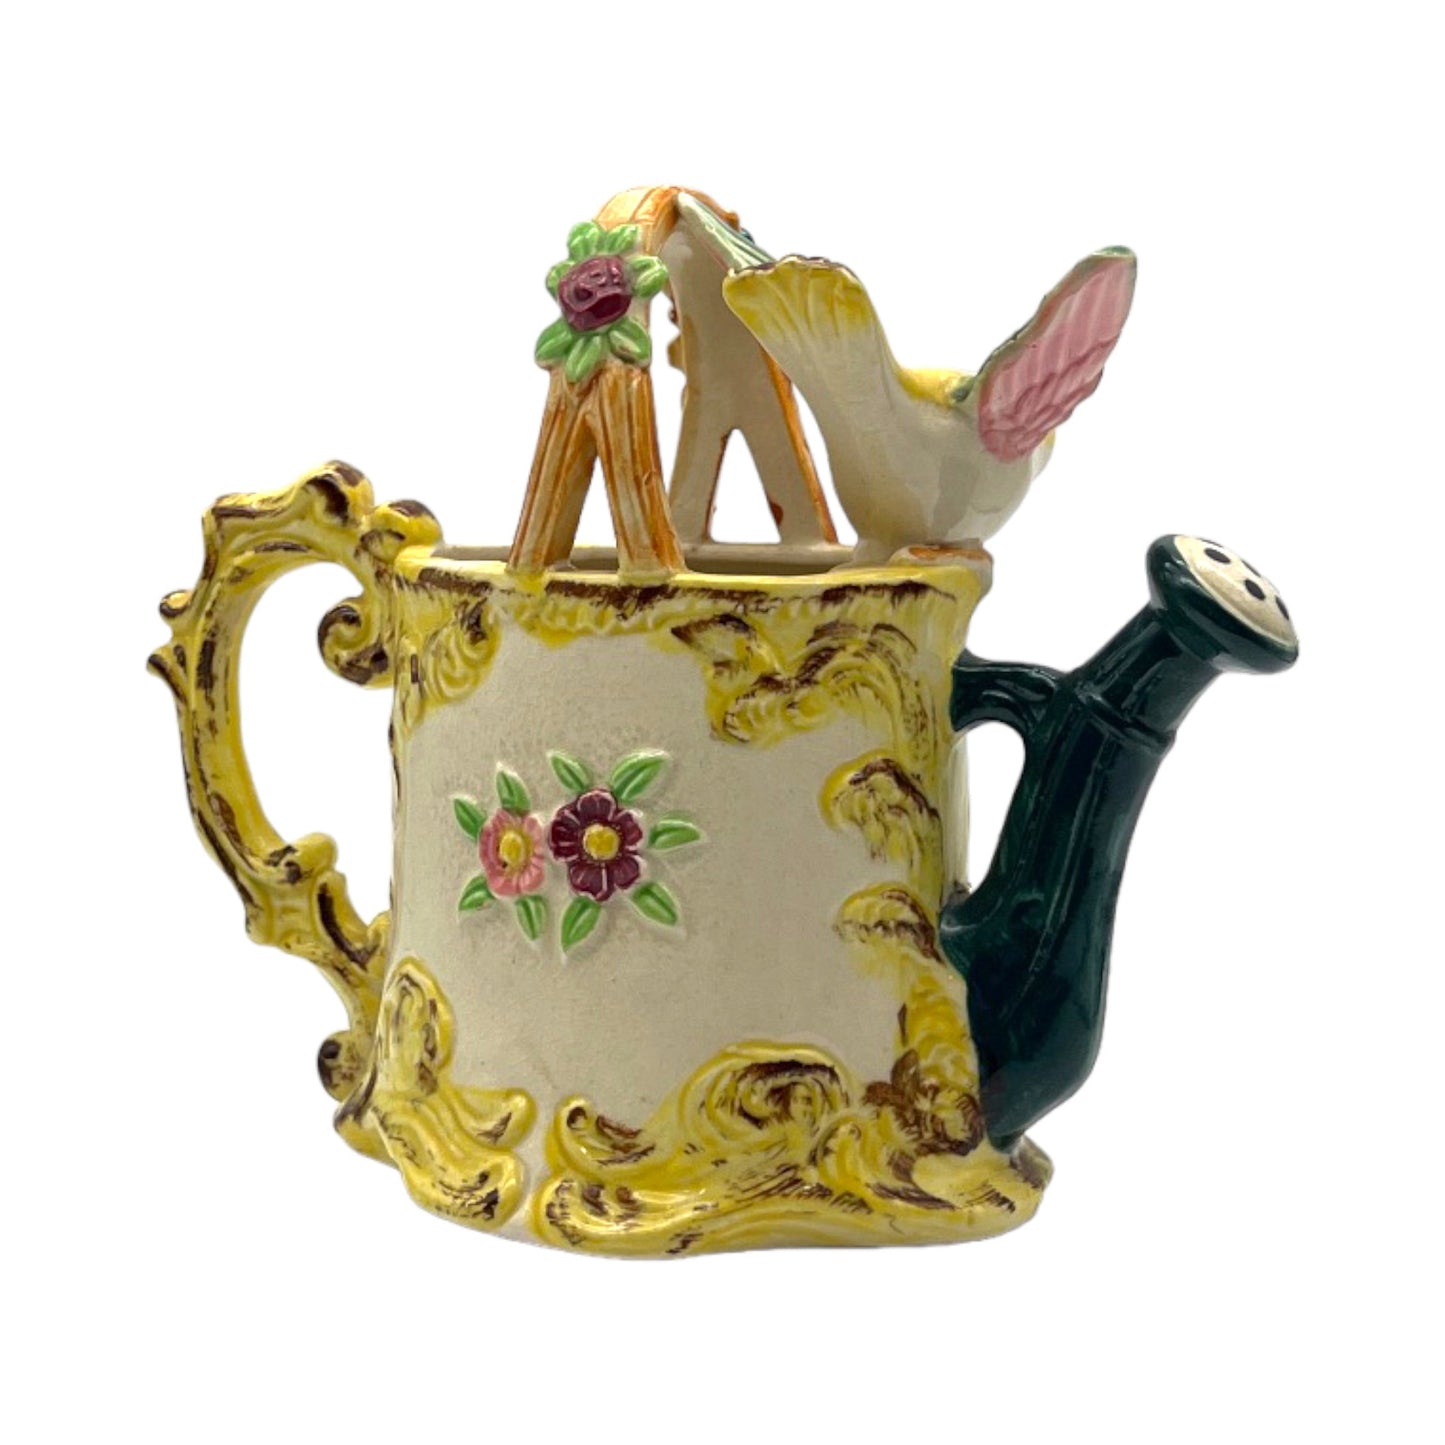 Teapot Basket With Bird - Hand Painted - Vintage - 7"